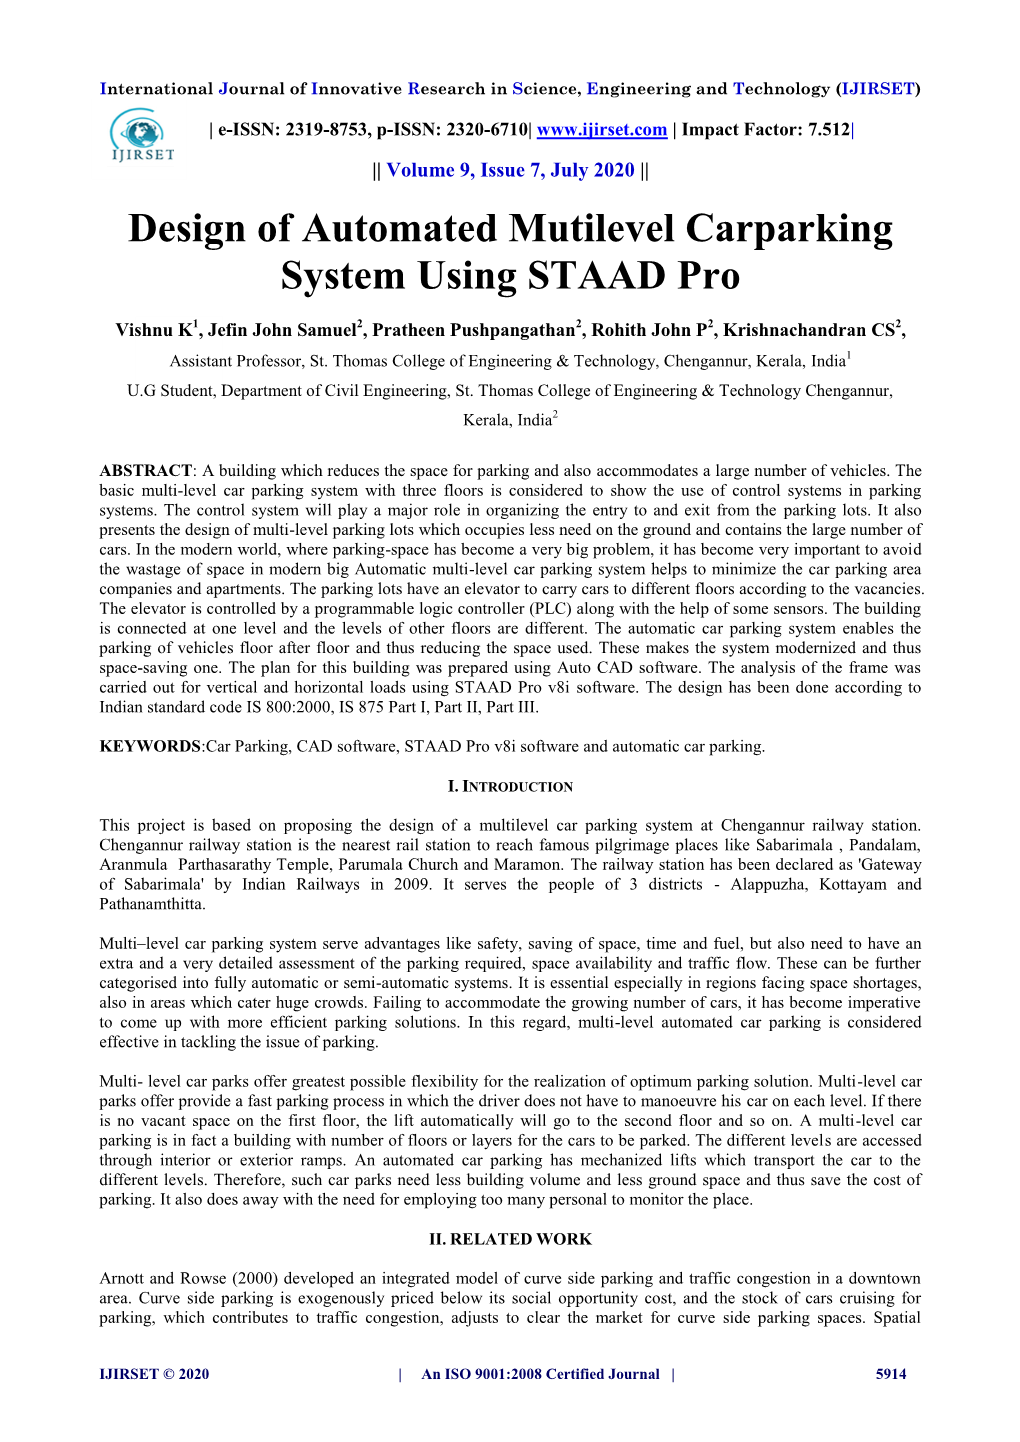 Design of Automated Mutilevel Carparking System Using STAAD Pro